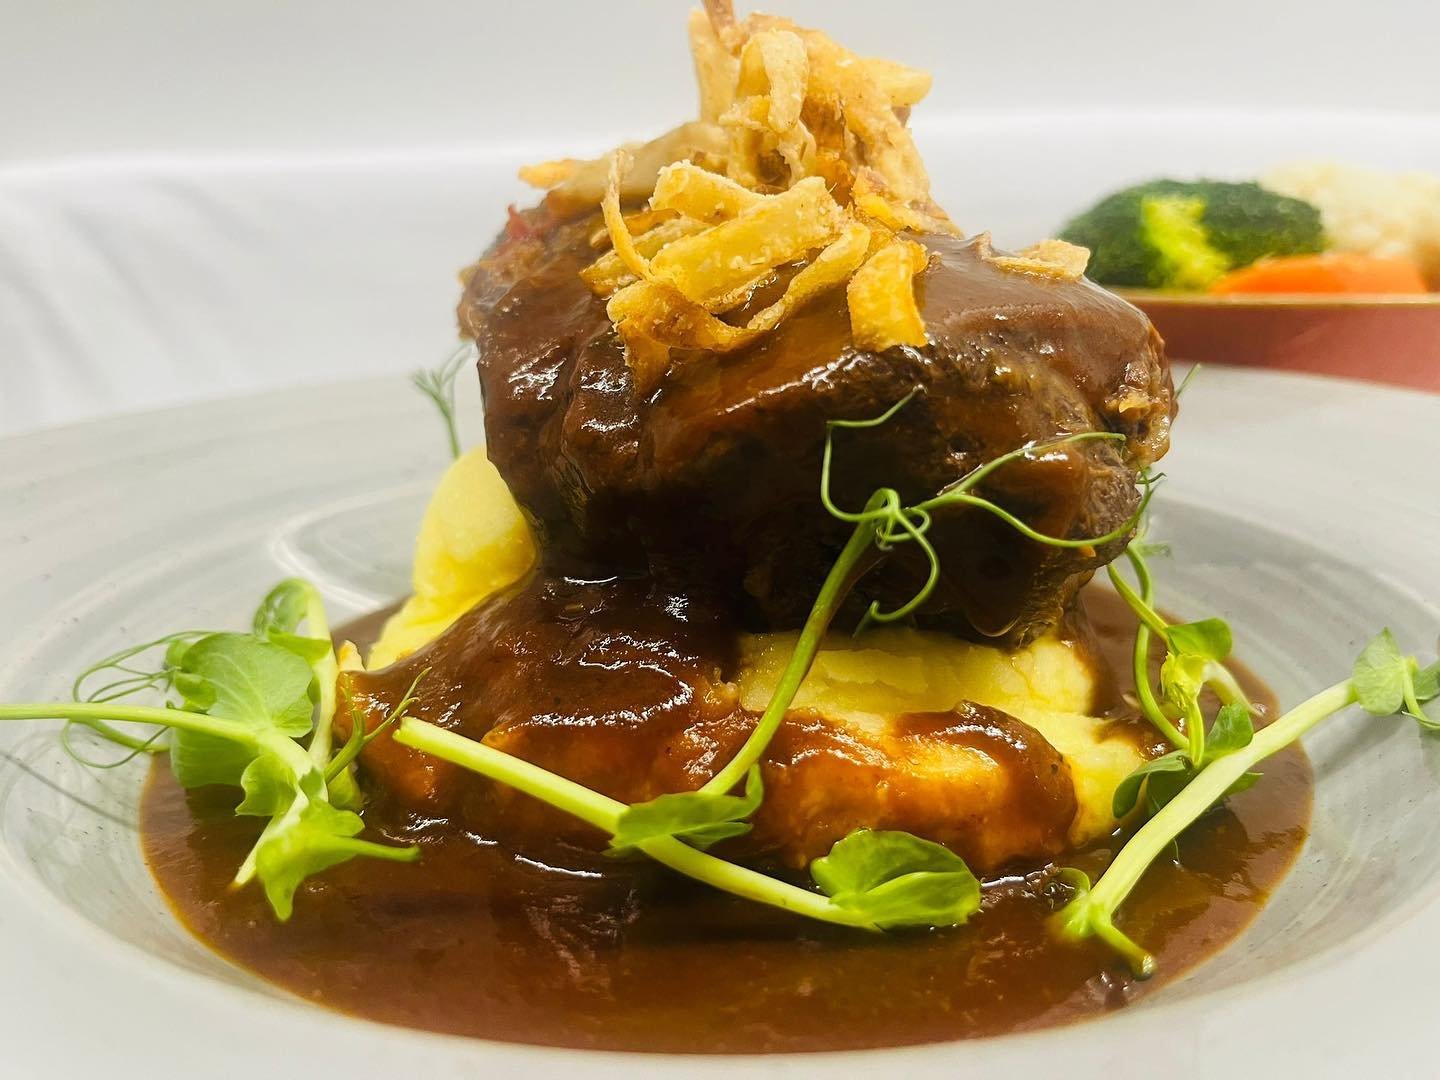 Chefs Special 🍴

Slow brazed beef cheeks served with creamy mash potatoes and seasoned vegetables. 

Only &euro;22.95